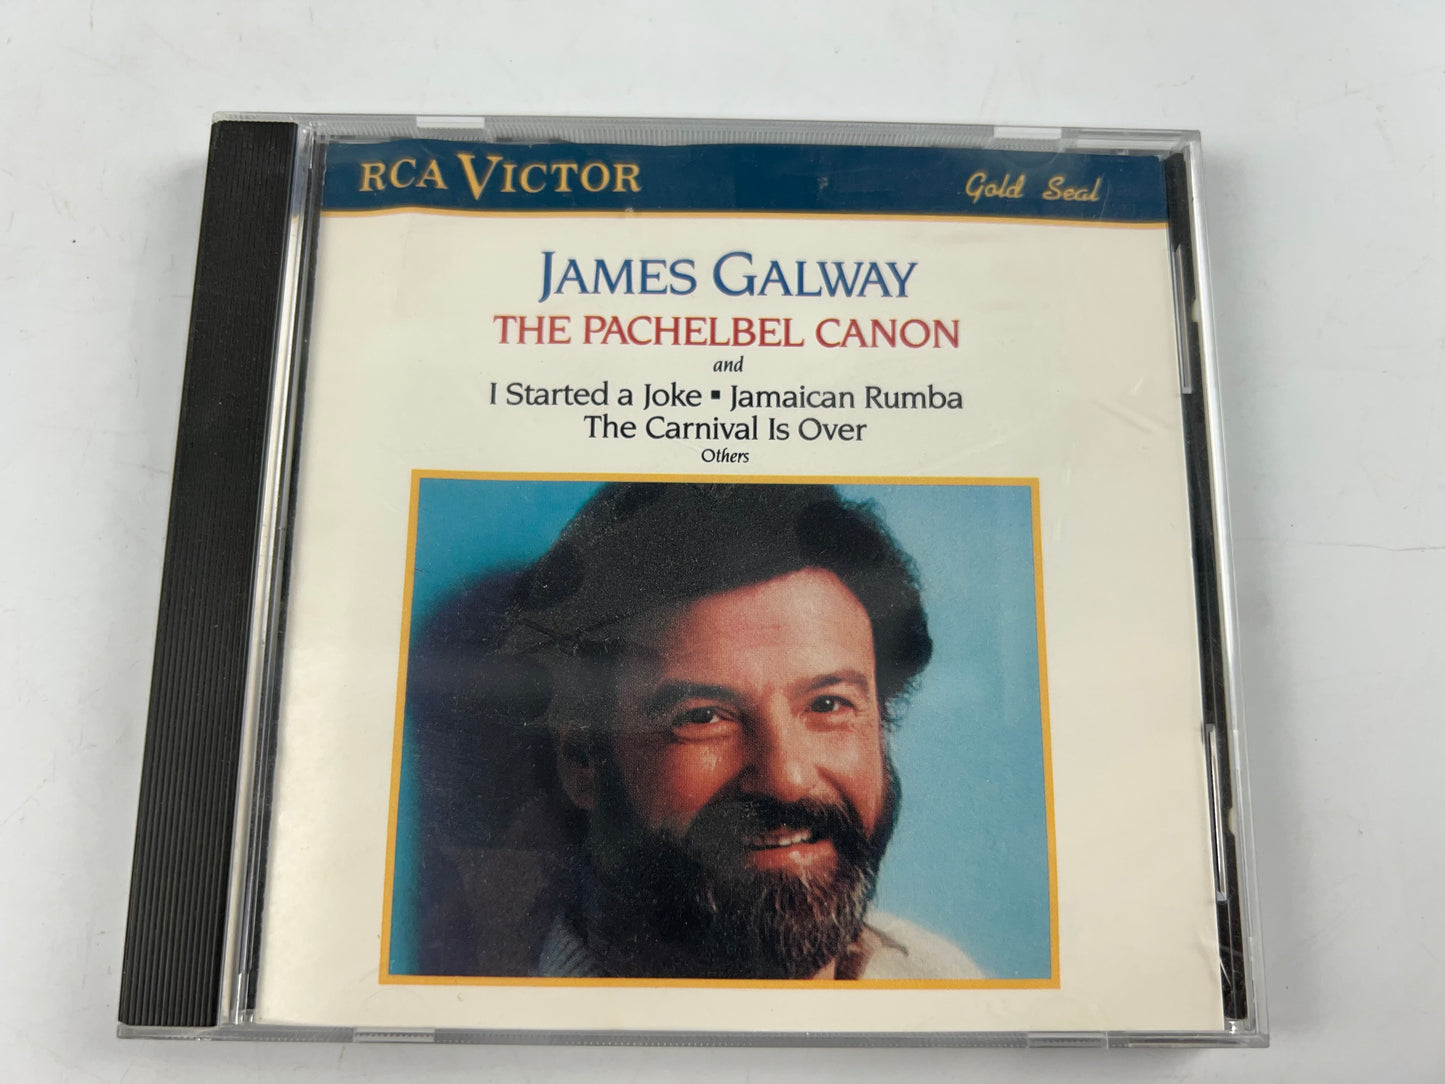 James Galway plays The Pachelbel Canon & 13 Other Works